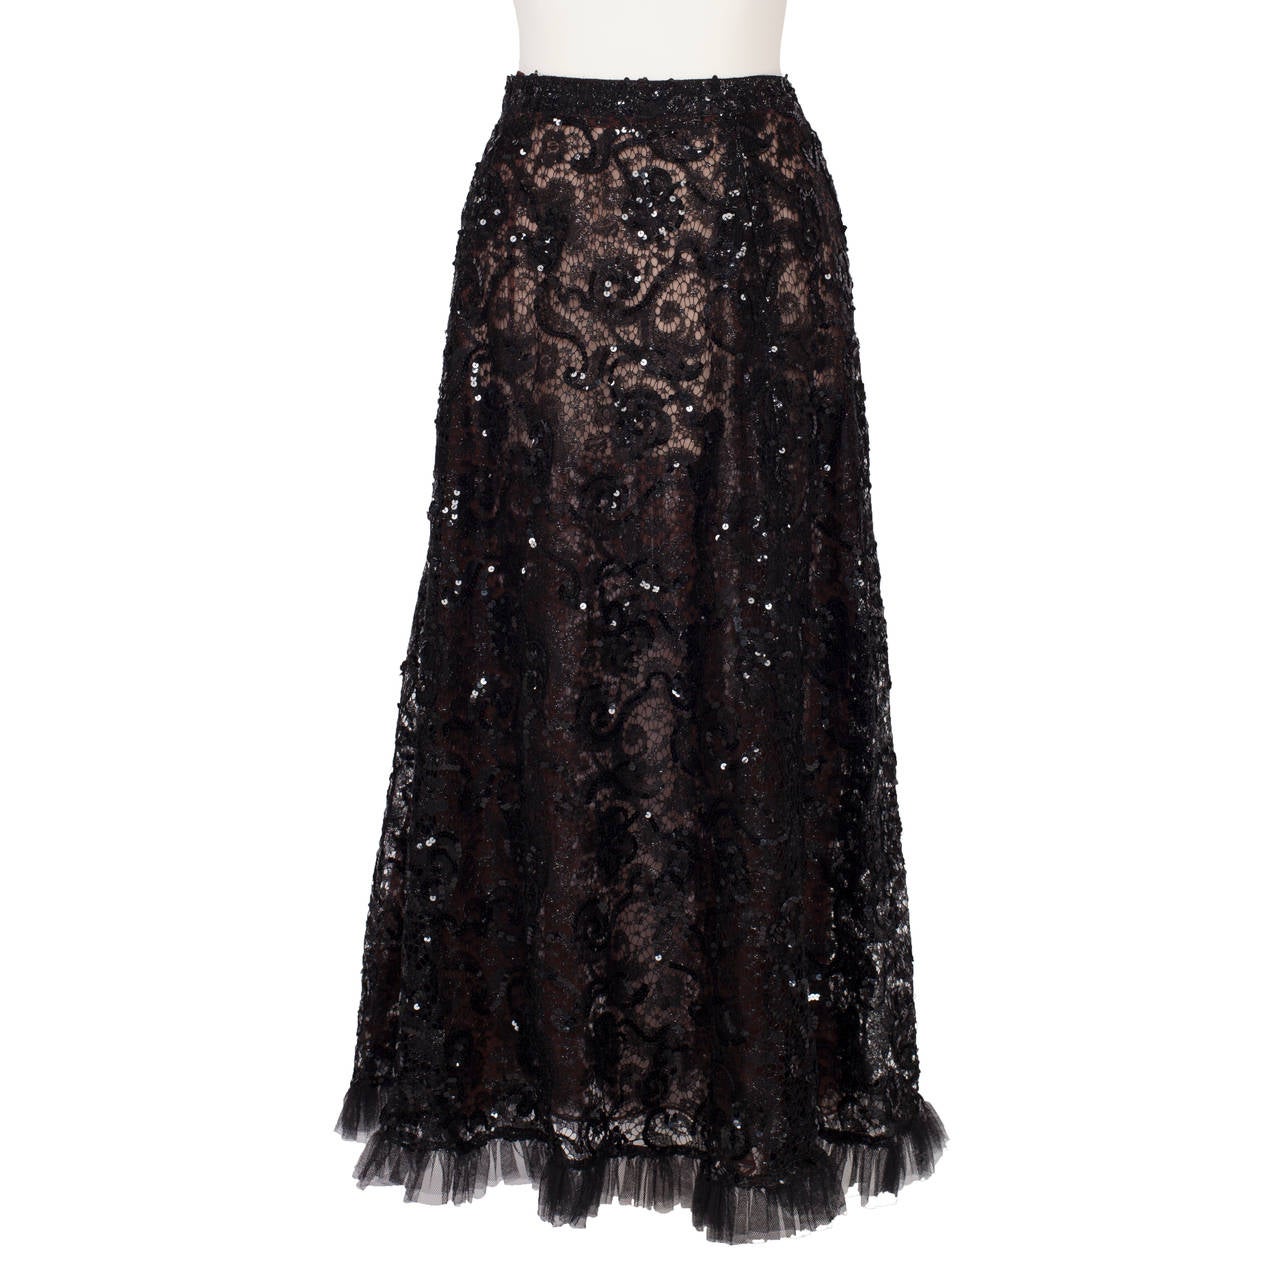 Yves Saint Laurent ensemble from 70's. French floral patterned black lace with sequins with three dimensional embroideries. 
Skirt has beige lining, oversized top closes with hooks.
French size 38
Skirt:
waist: 64 cm
Length: 90